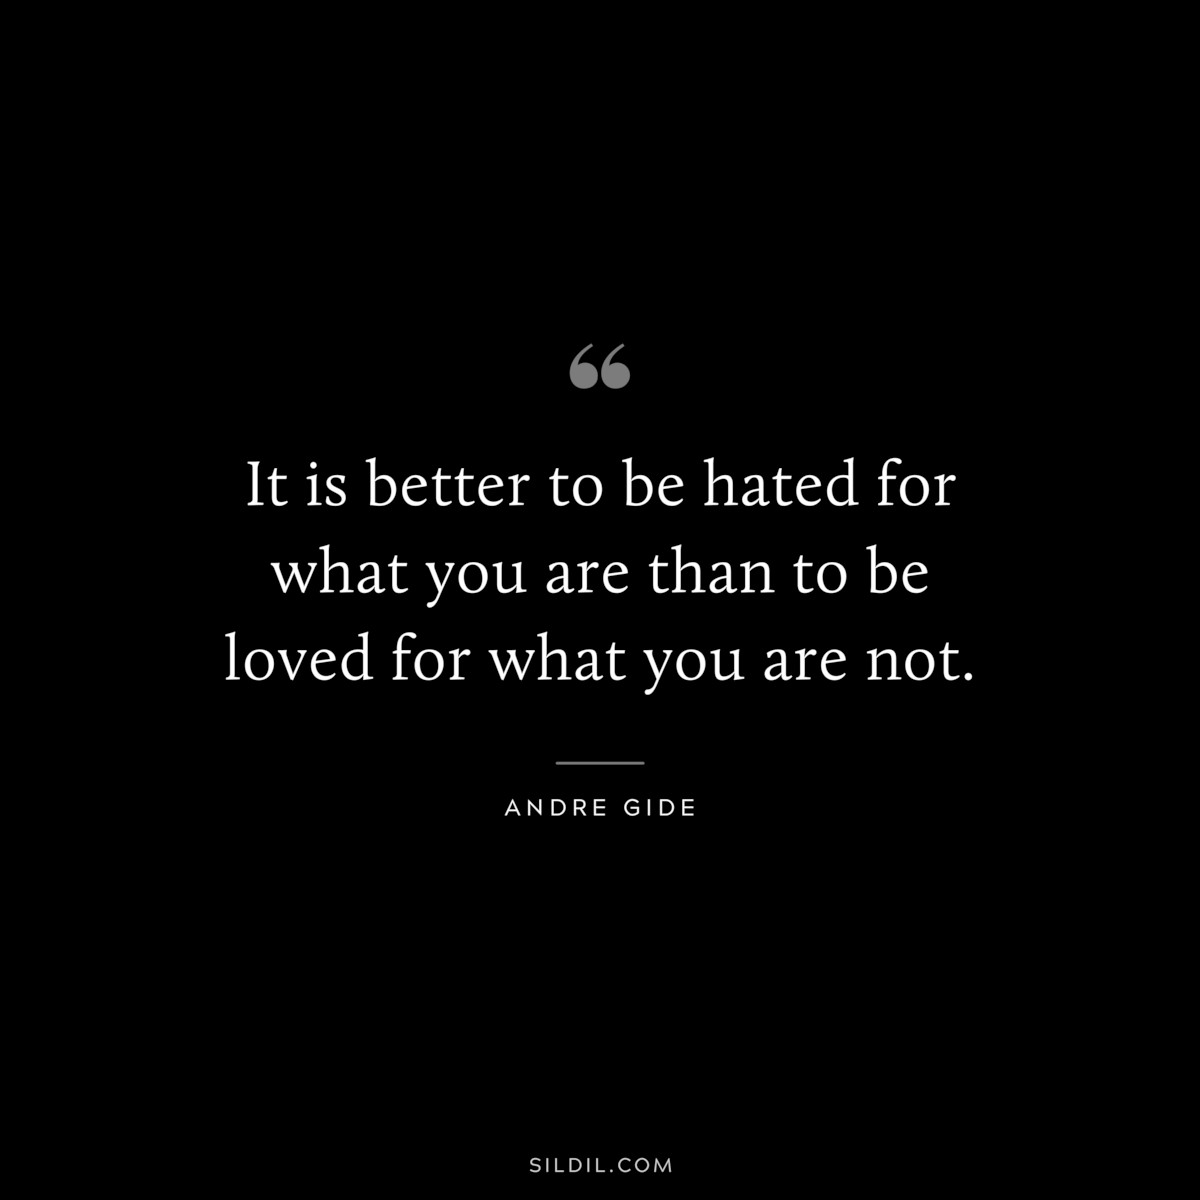 It is better to be hated for what you are than to be loved for what you are not. ― Andre Gide